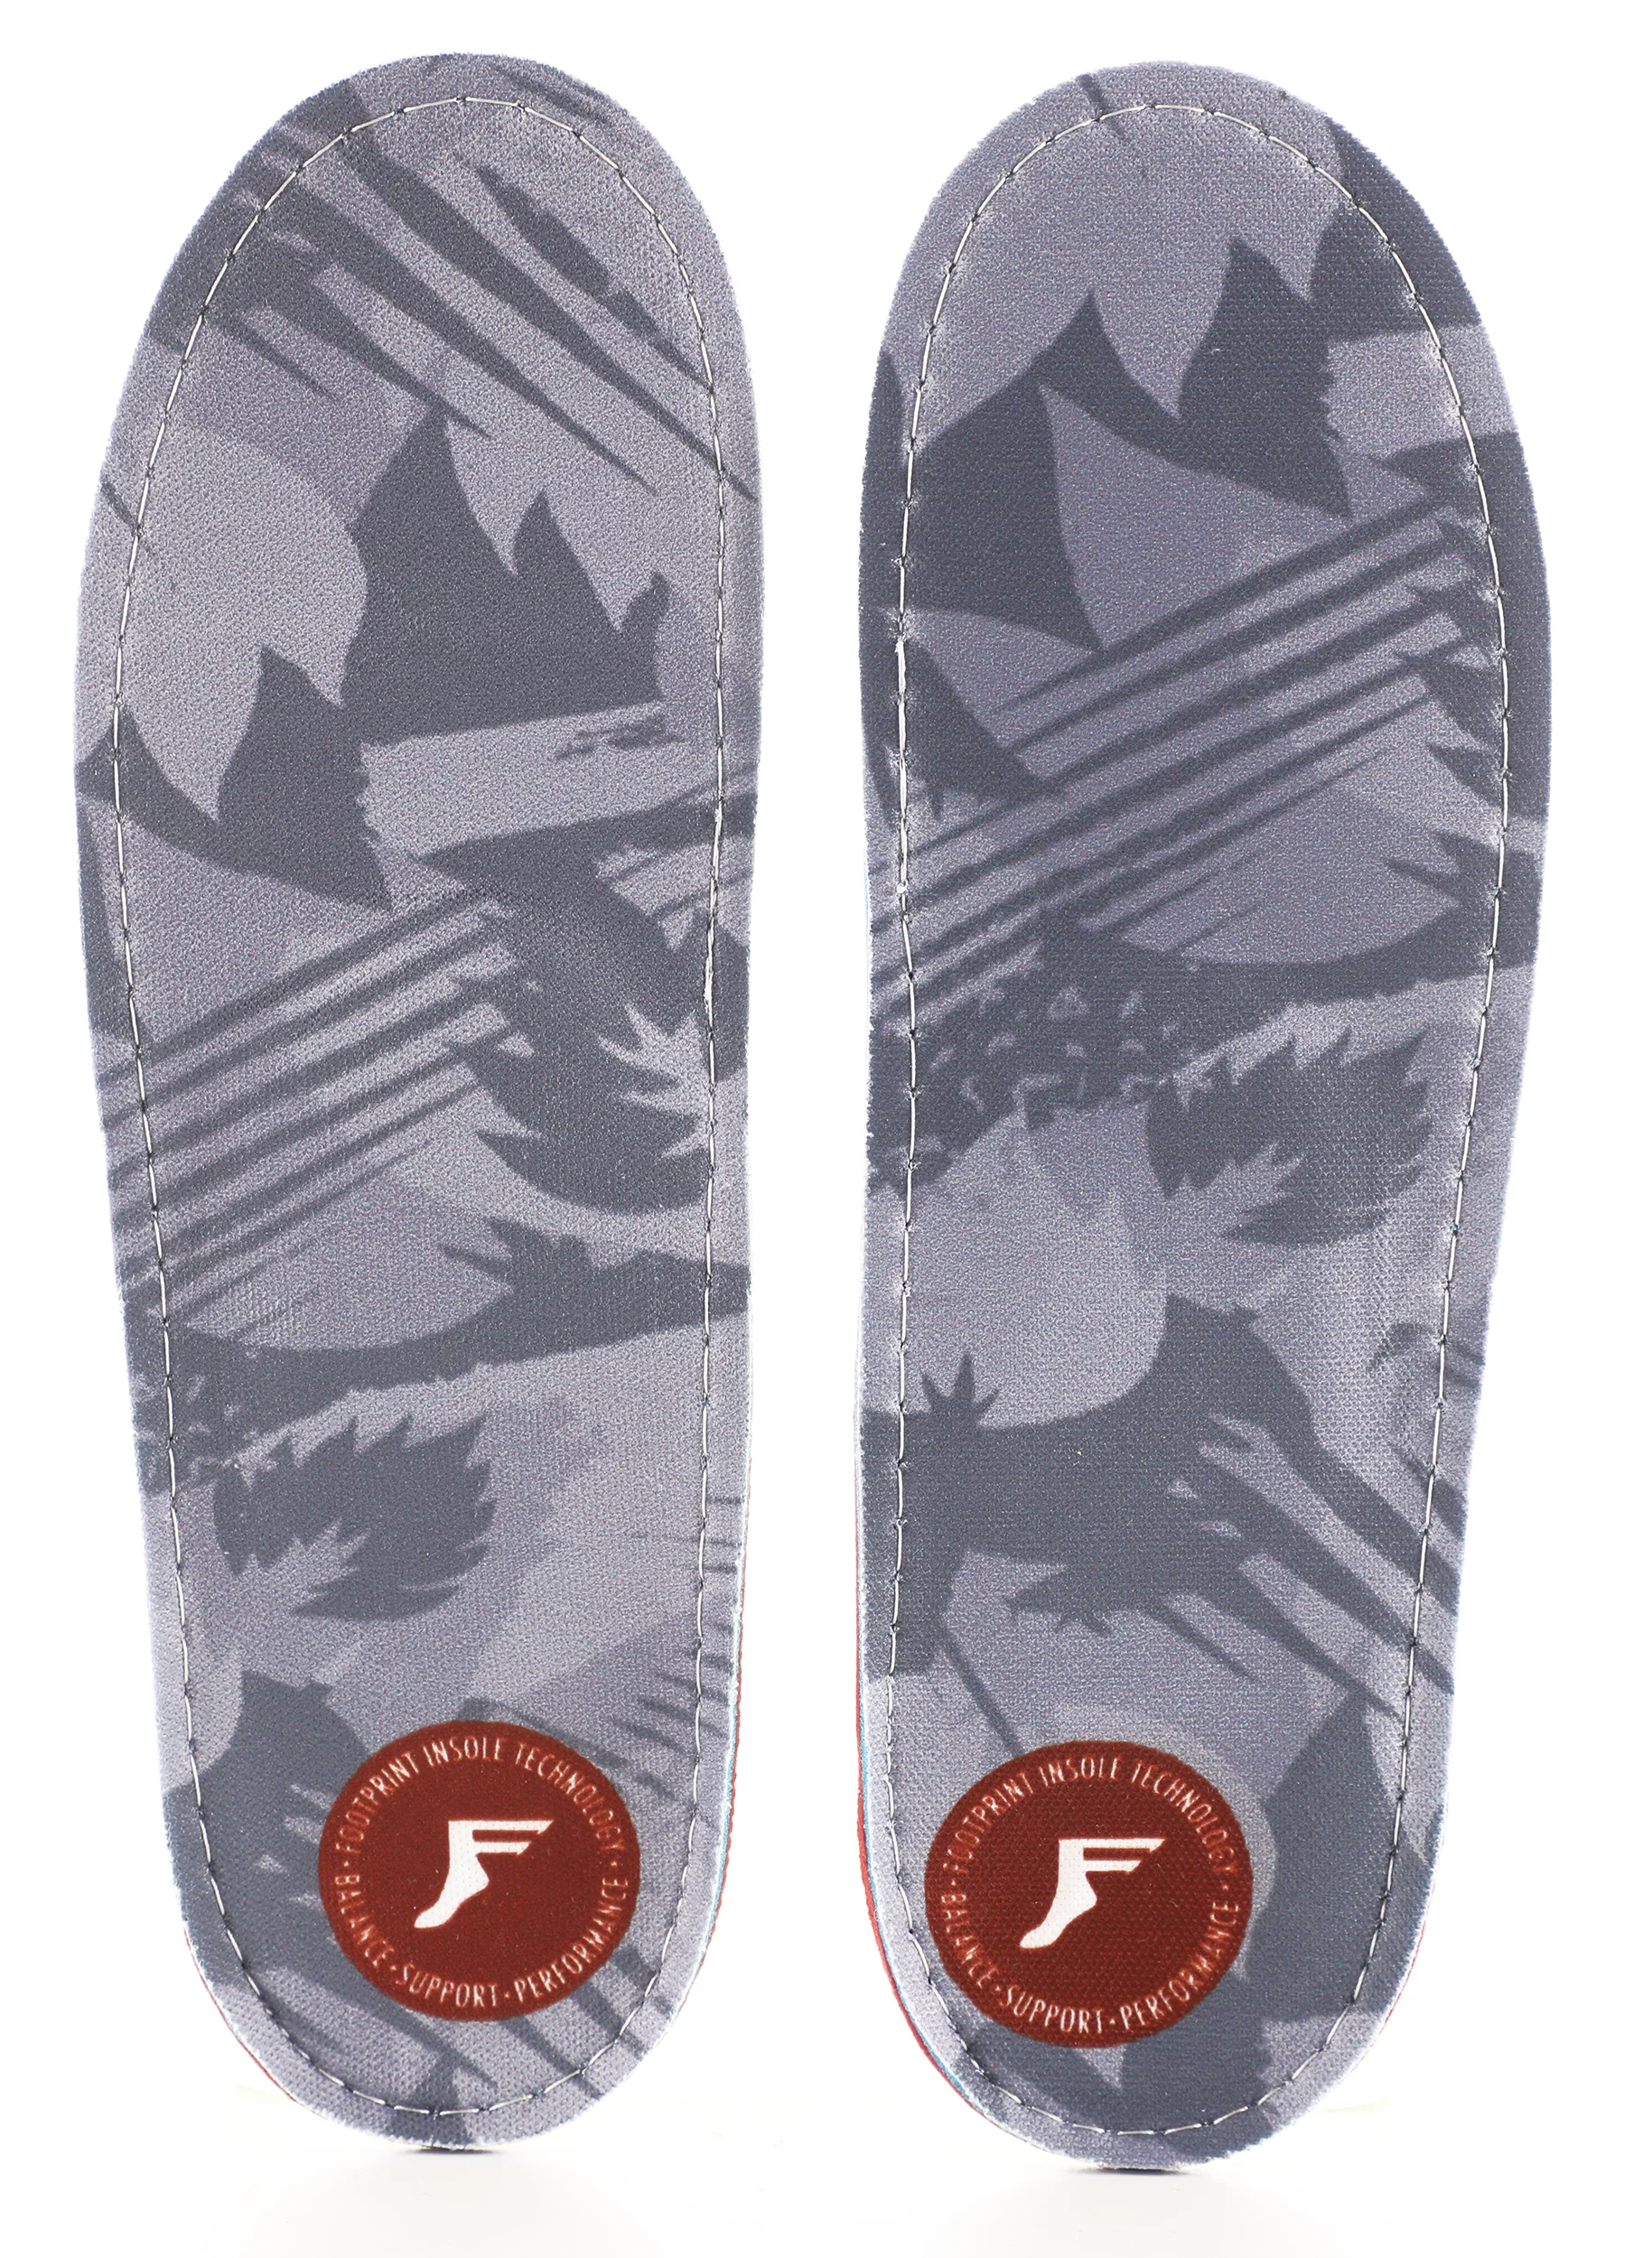 Colours Collective Camo Footprint Gamechanger Orthotic Shoe Insoles 